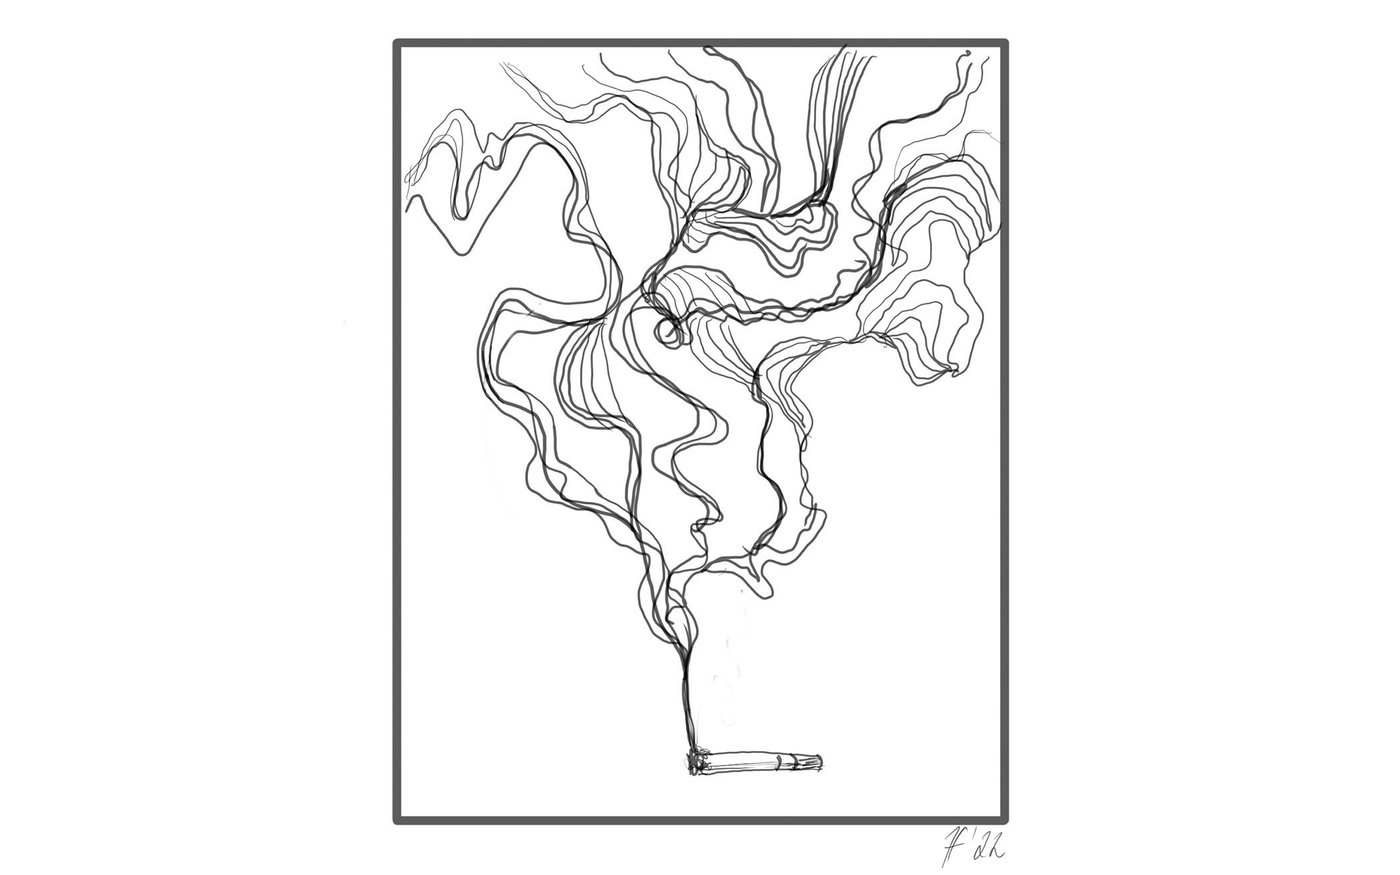 Black and white graphic. On white background there is a black rectangular and portrait frame. In it at the bottom edge is a lit cigarette. Black smoke rises from it and forms squiggly patterns.